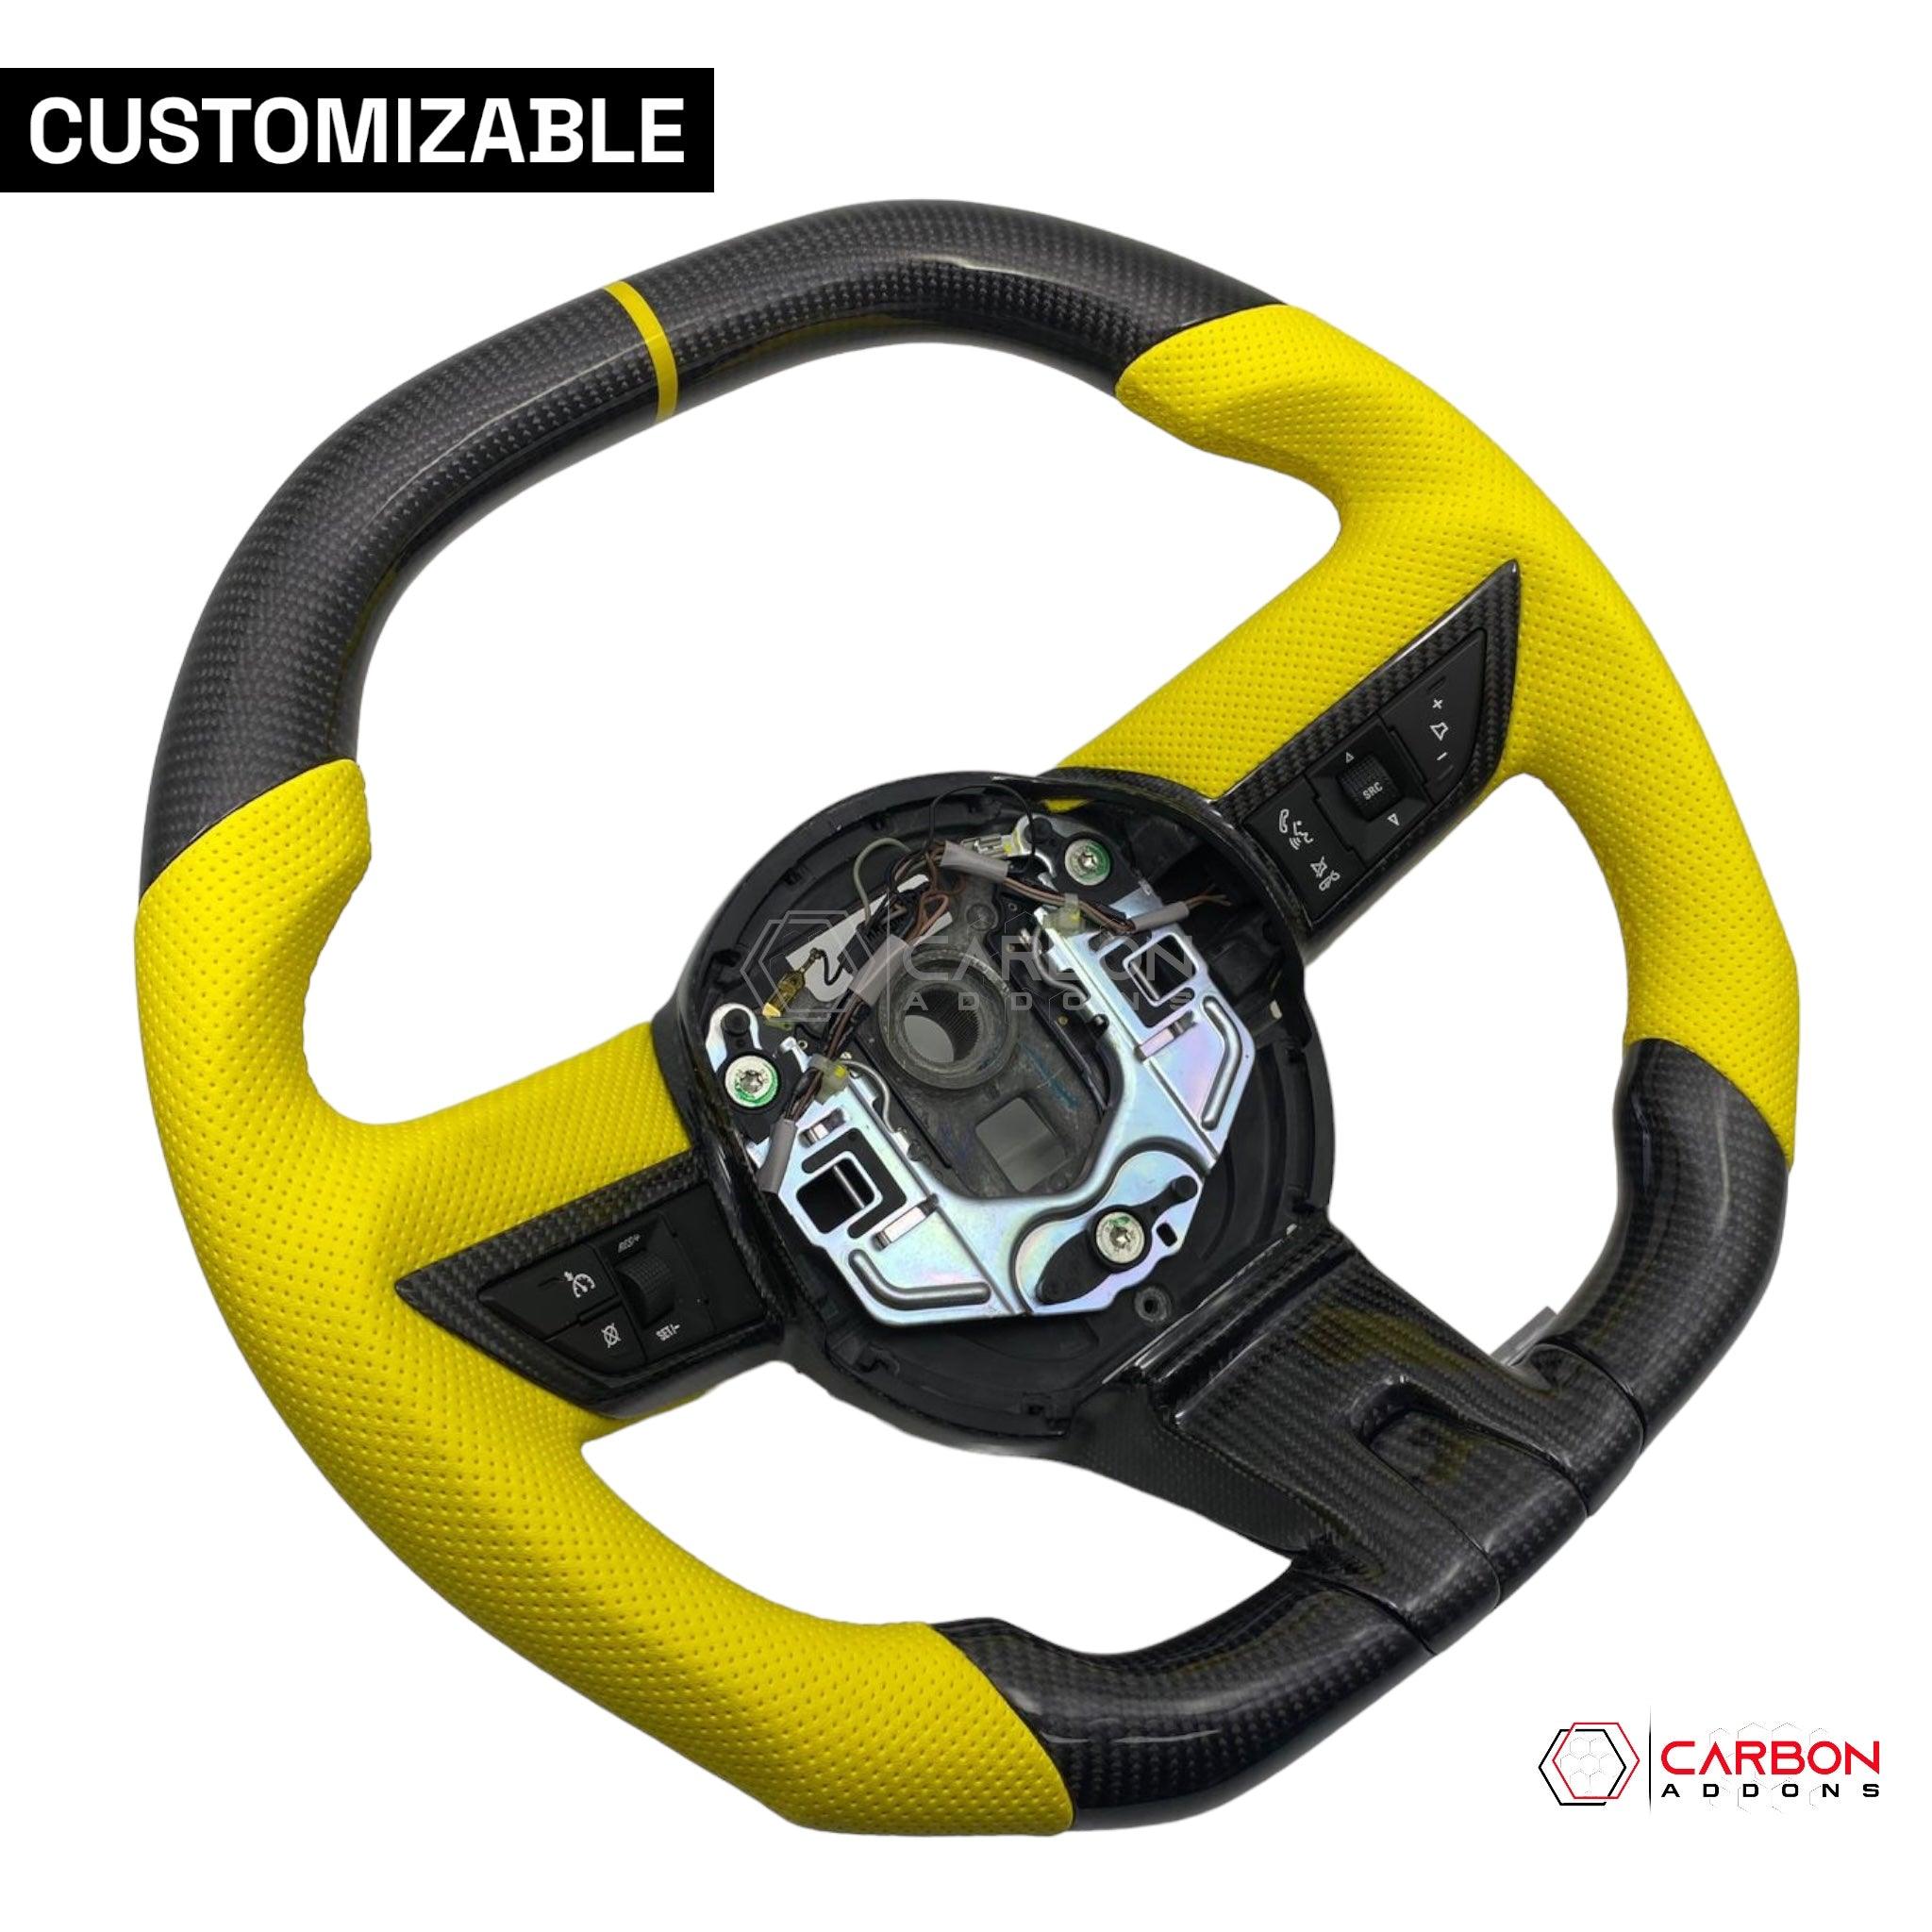 Customizable Carbon Fiber Steering Wheel for Chevy Camaro 2010-2012 - carbonaddons Carbon Fiber Parts, Accessories, Upgrades, Mods